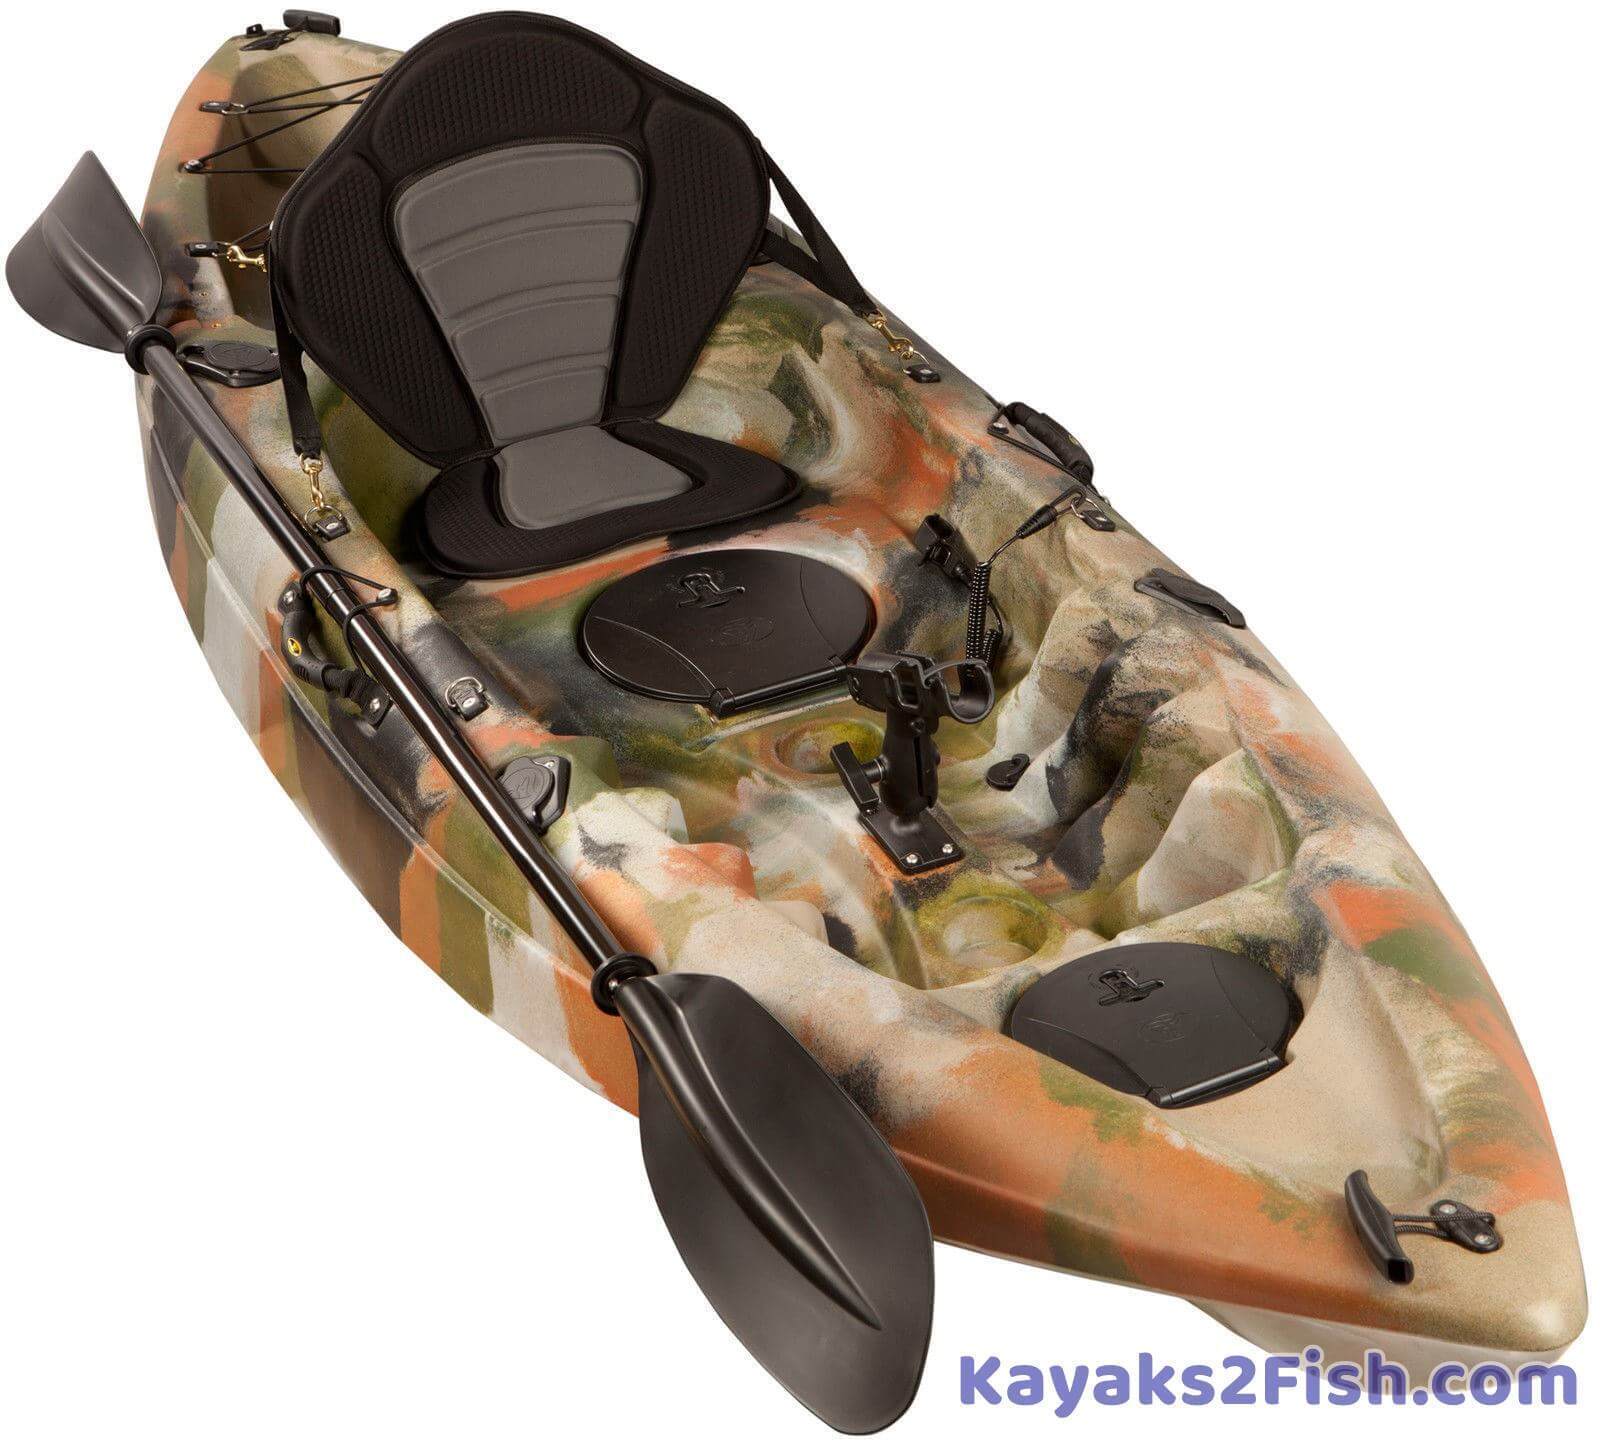 K2F Luxury Kayak Seat With High Back Rest Kayak Seat Padded Kayak Seat -  $79 - Kayaks2Fish